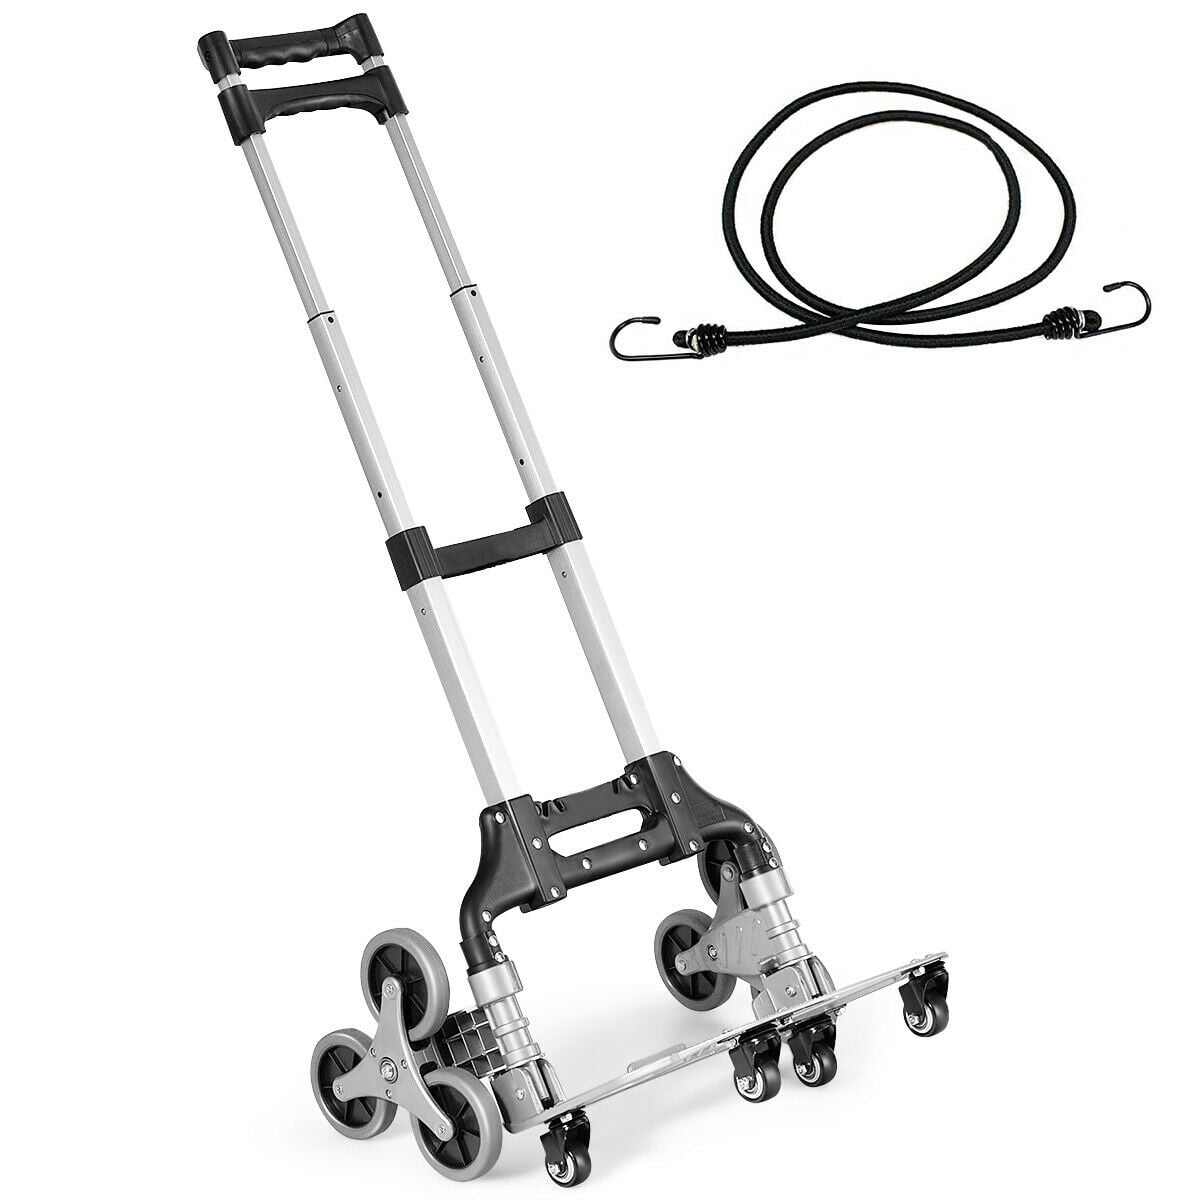 Details about   WINICE Stair Climber Truck Portable Folding Trolley Adjustable Handle Cart 170lb 